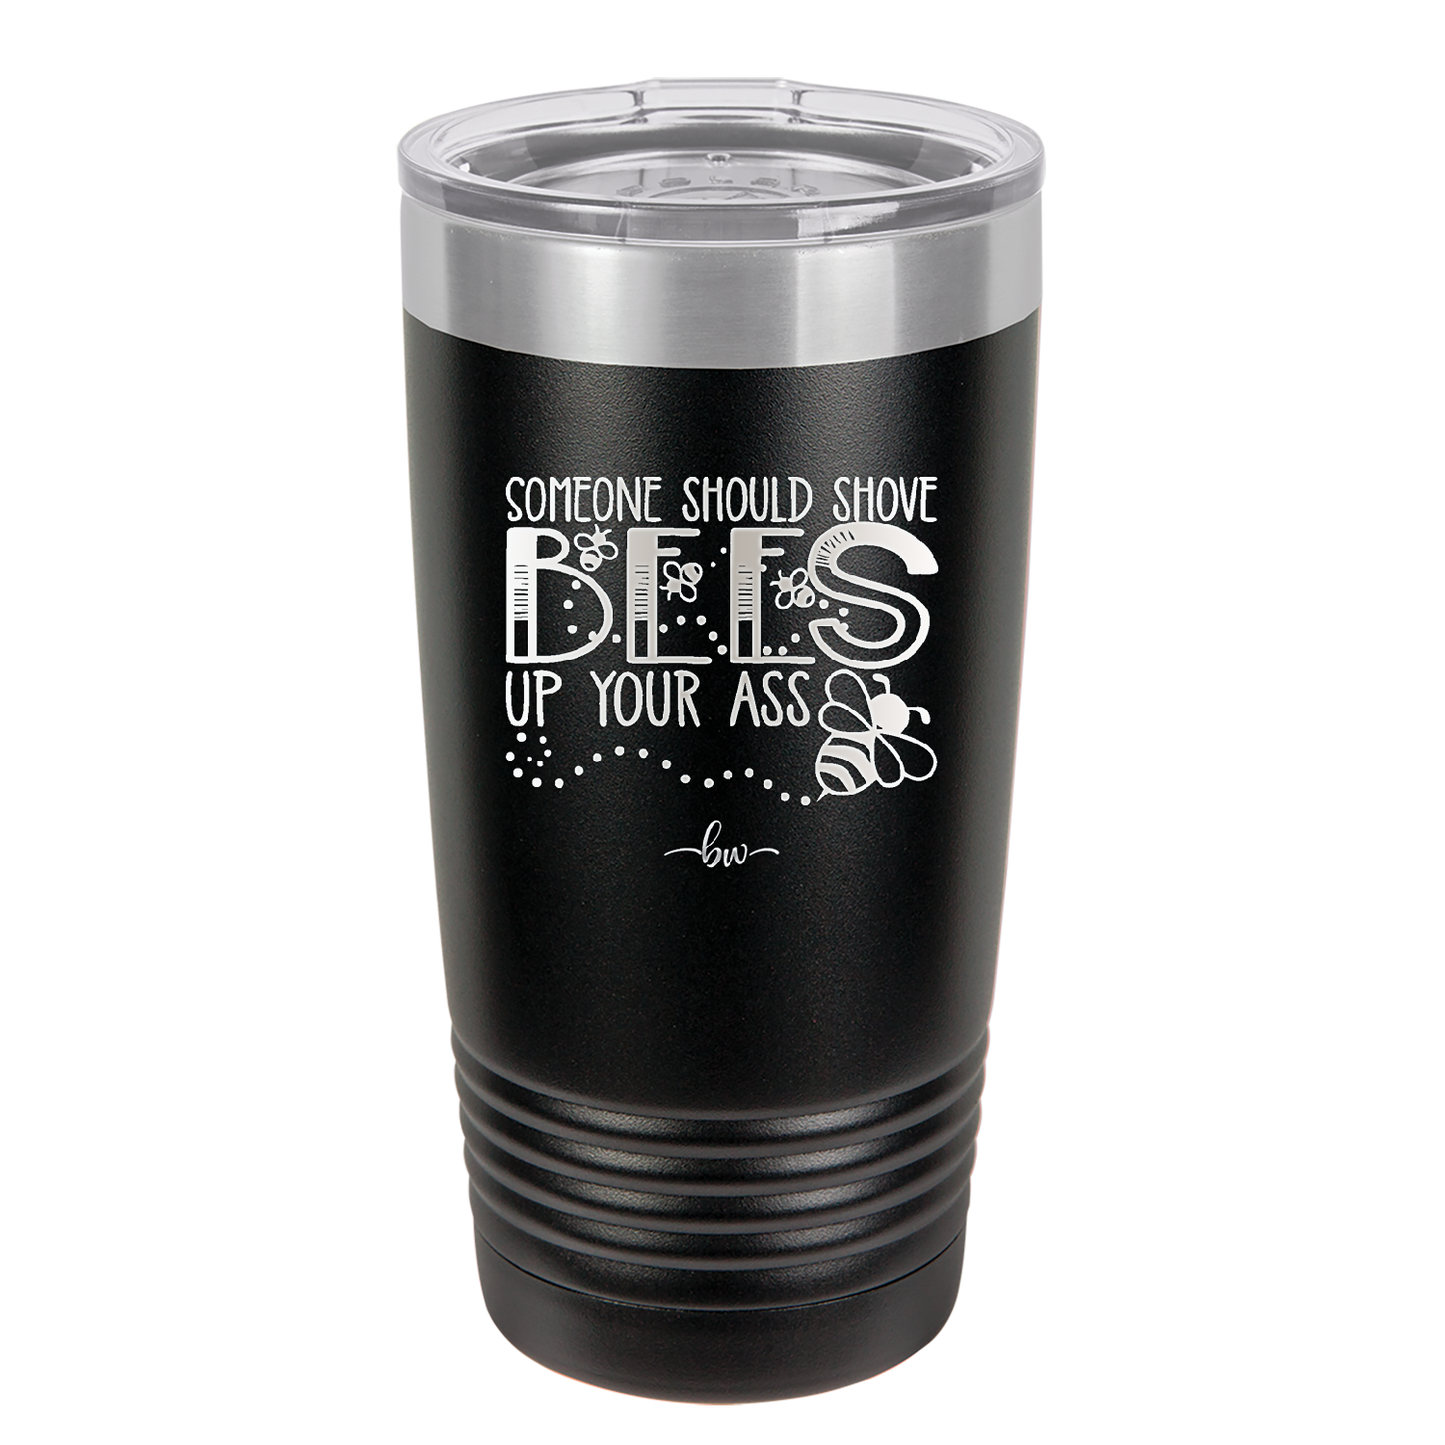 Someone Should Shove Bees Up Your Ass - Laser Engraved Stainless Steel Drinkware - 1372 -